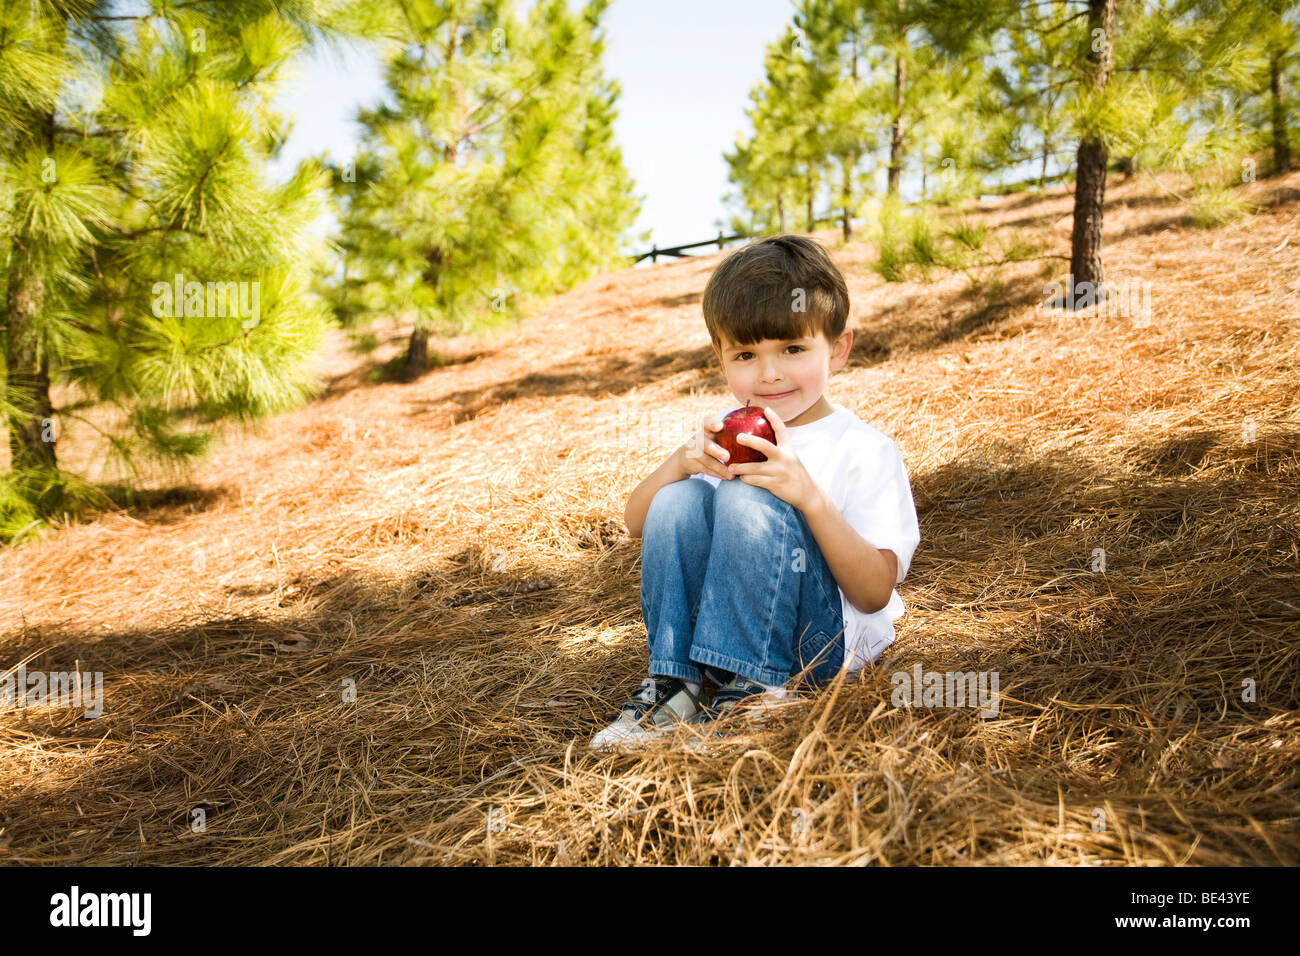 boy holding red apple Stock Photo